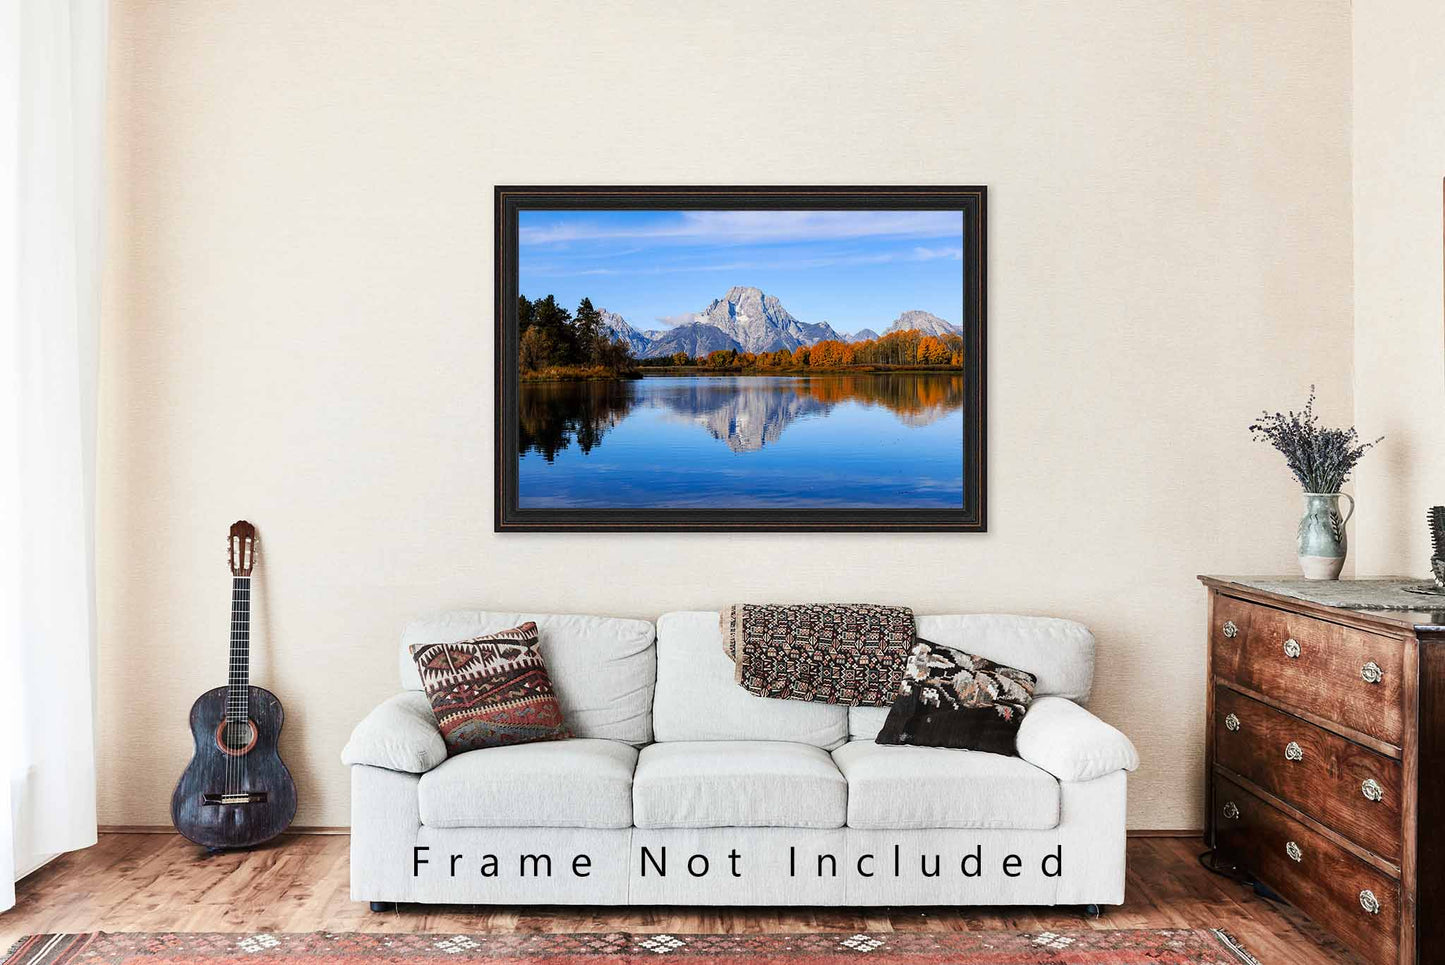 Grand Teton National Park Photography Print | Mount Moran Picture | Snake River Wall Art | Wyoming Photo | Rocky Mountain Decor | Not Framed